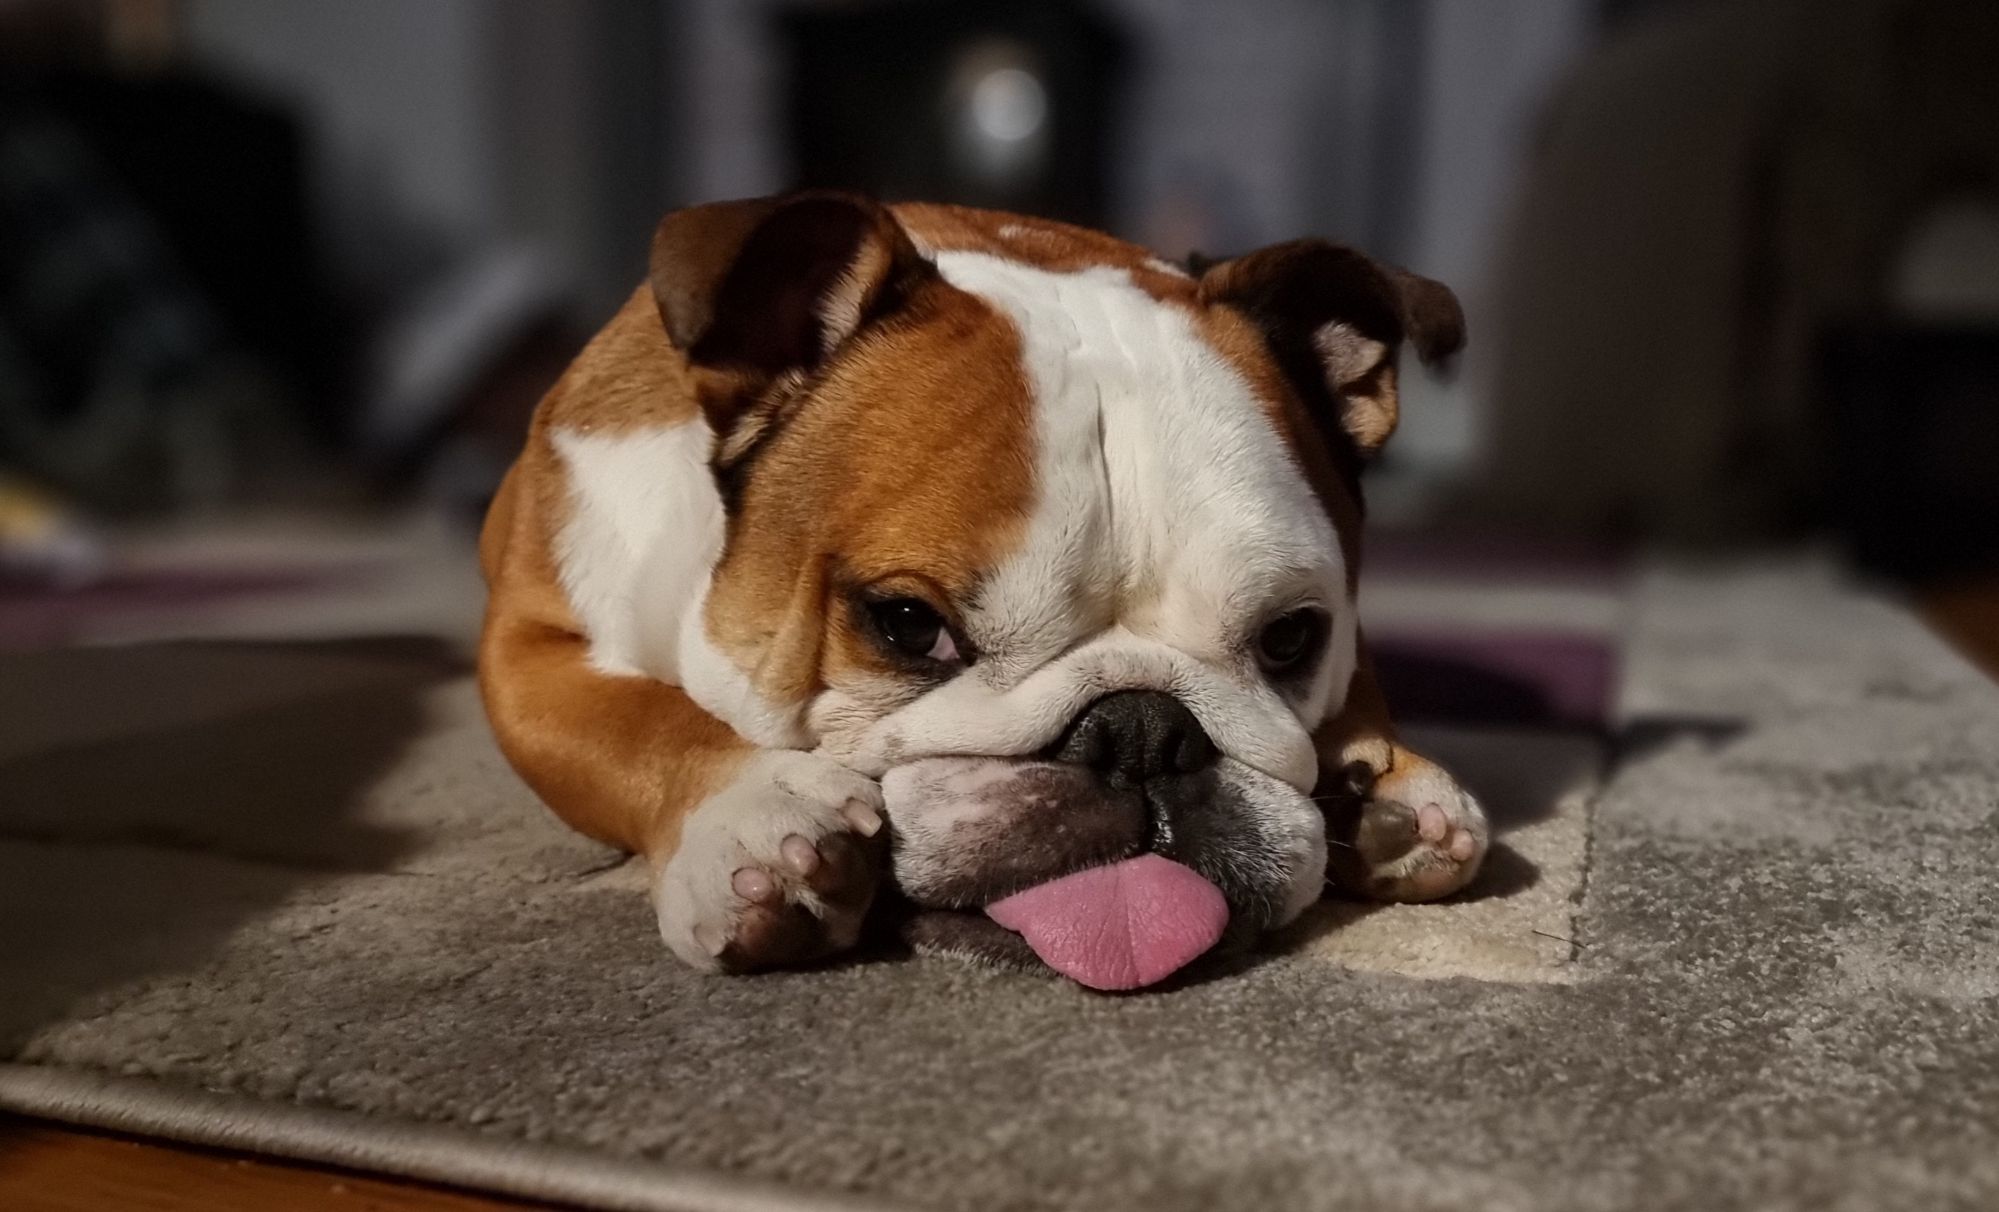 A white-and-brown bulldog lies flat, his tongue sticking out, on a rug.